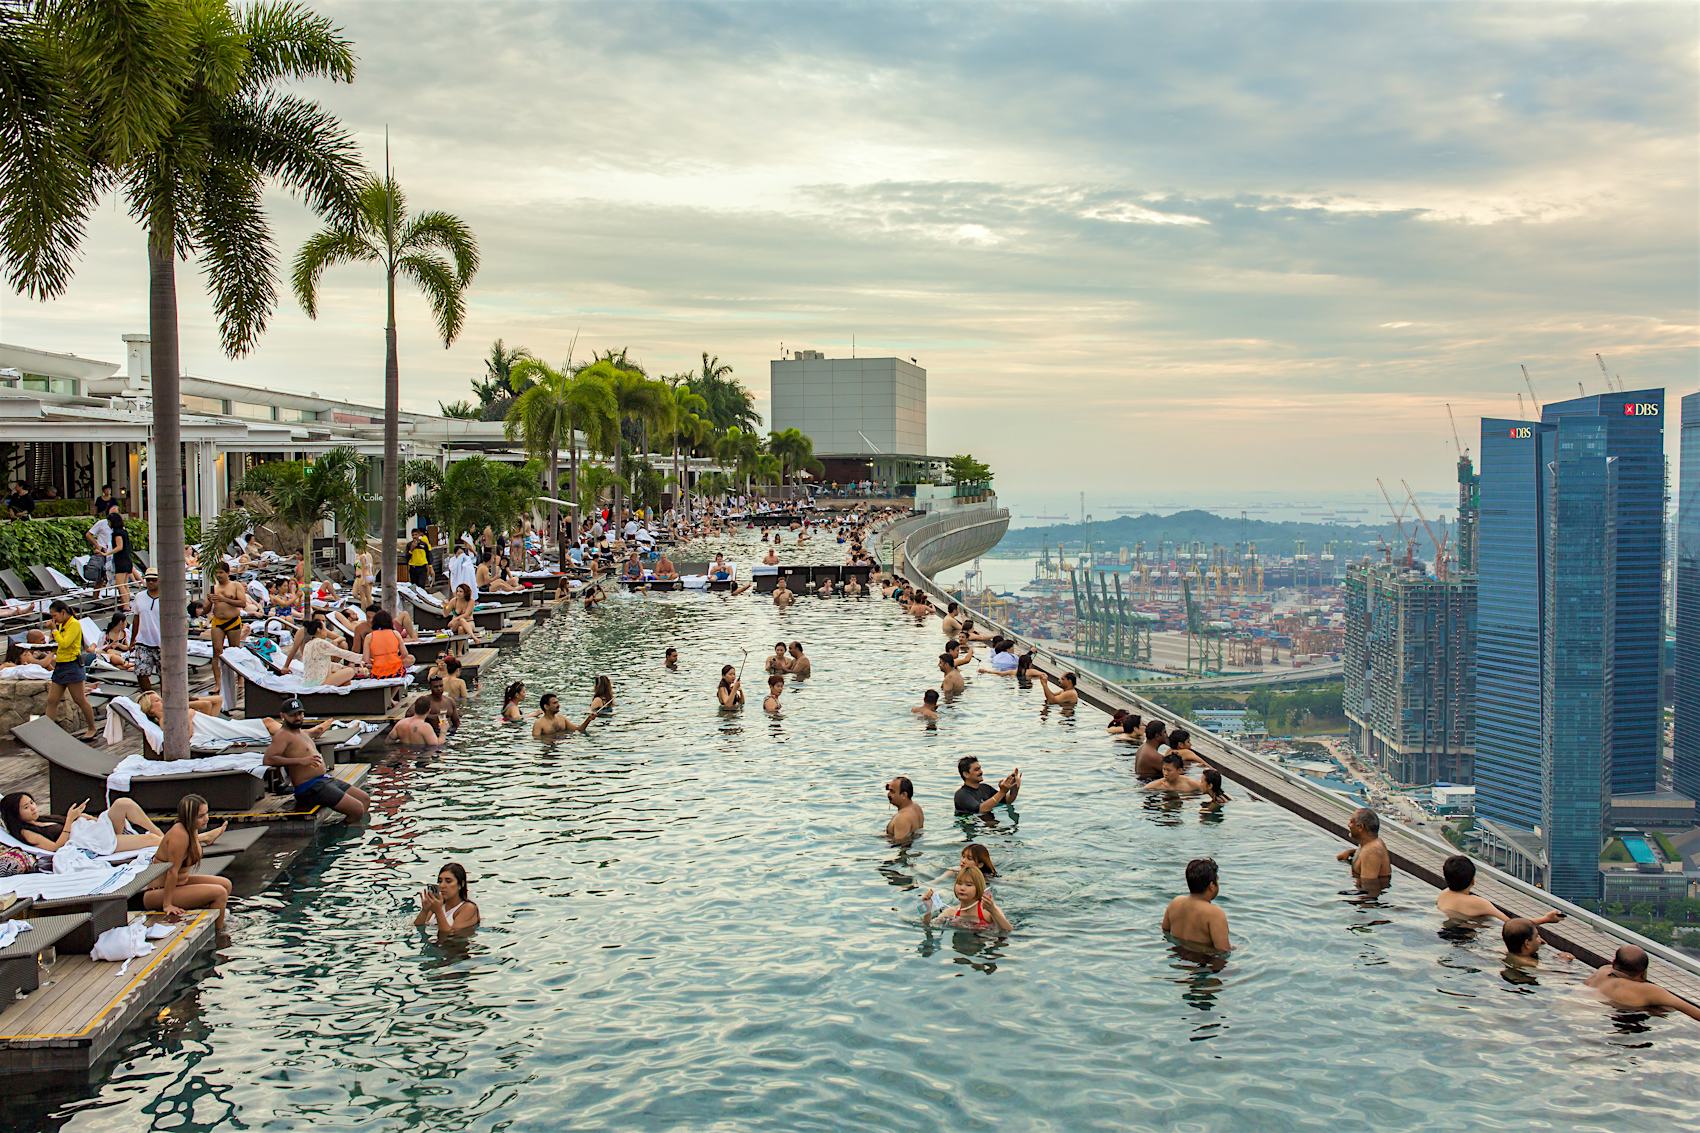 Infinity pool at Marina Bay Sands hotel in Singapore